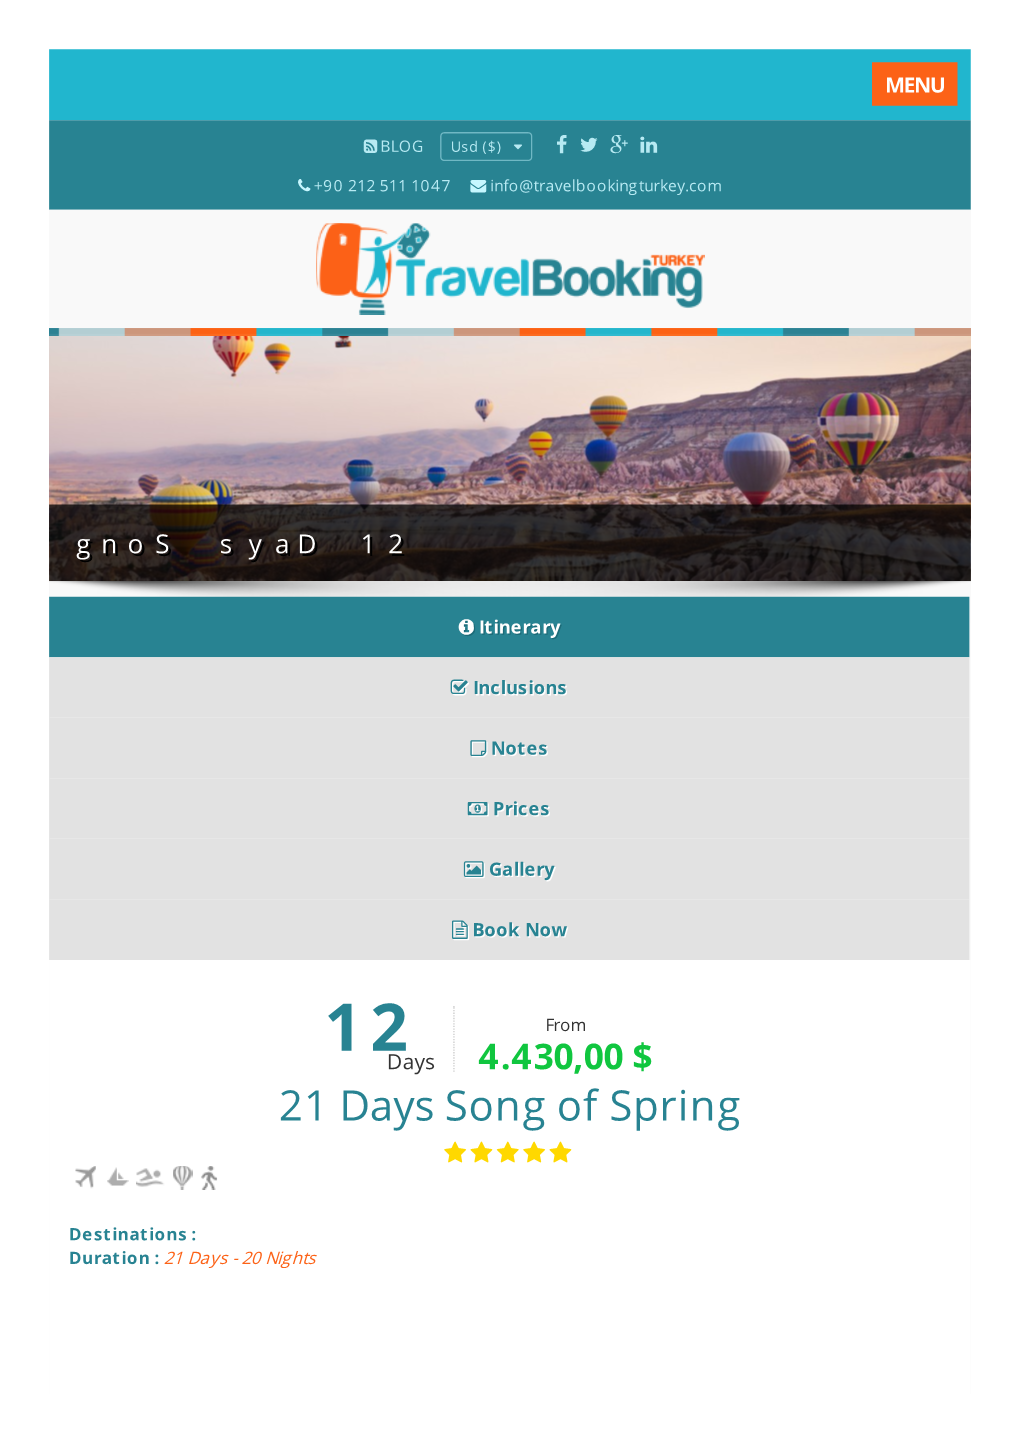 21 Days Song of Spring | Travel Booking Turkey